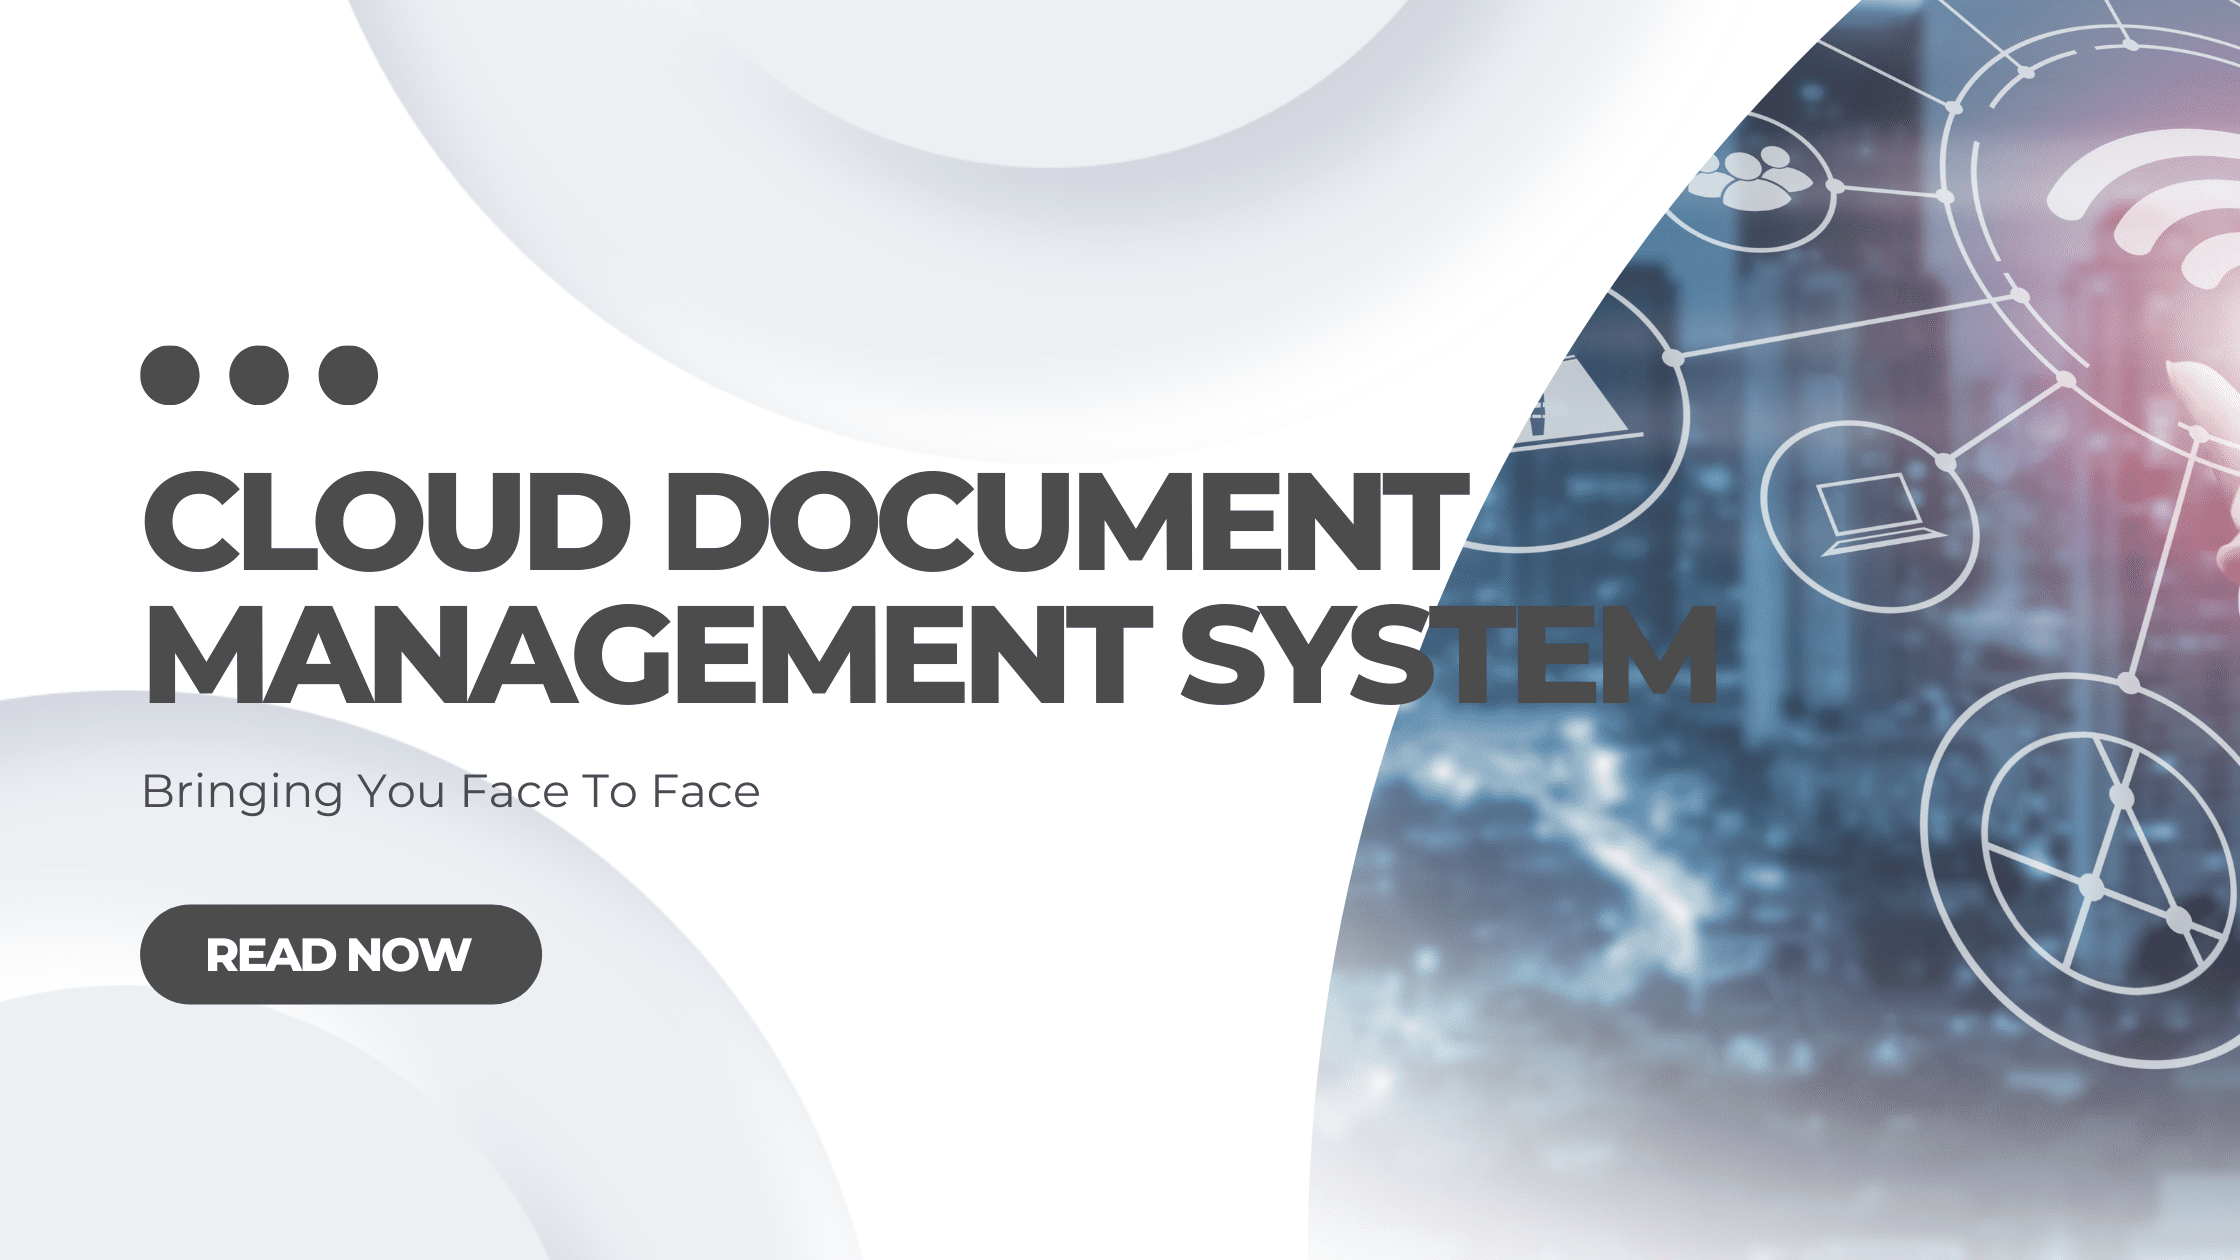 Bringing You Face To Face With Cloud Document Management System